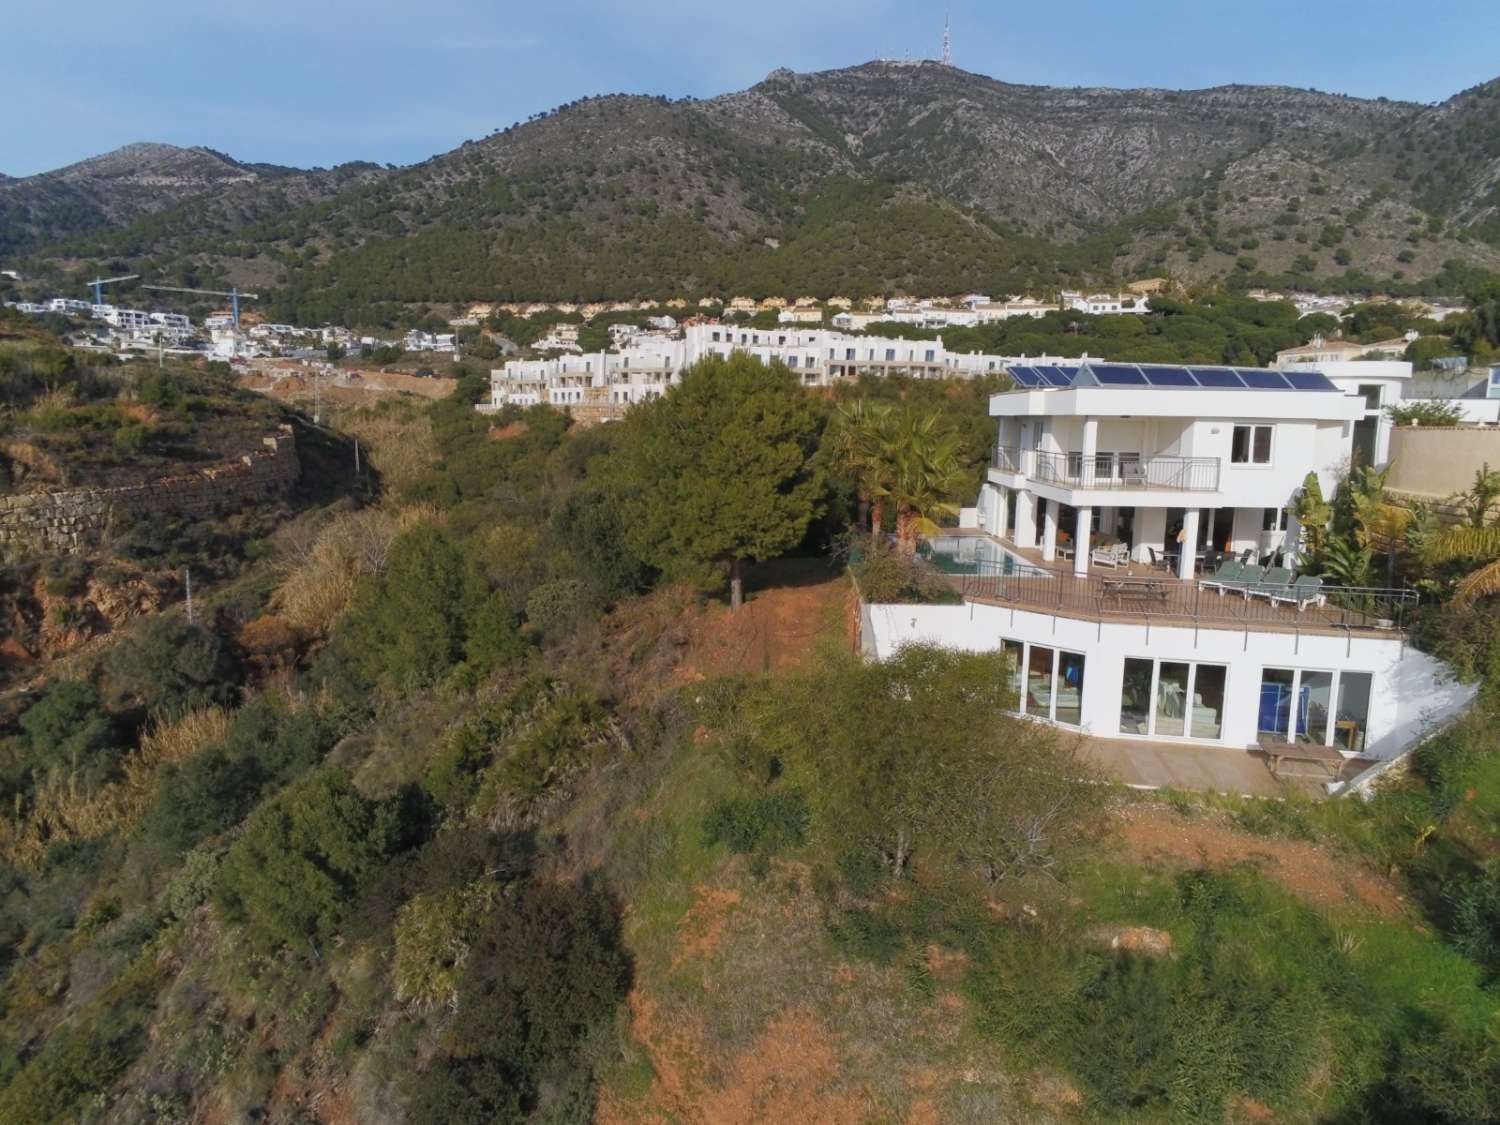 SPECTACULAR Villa for sale in Urbanization of Mijas with panoramic views